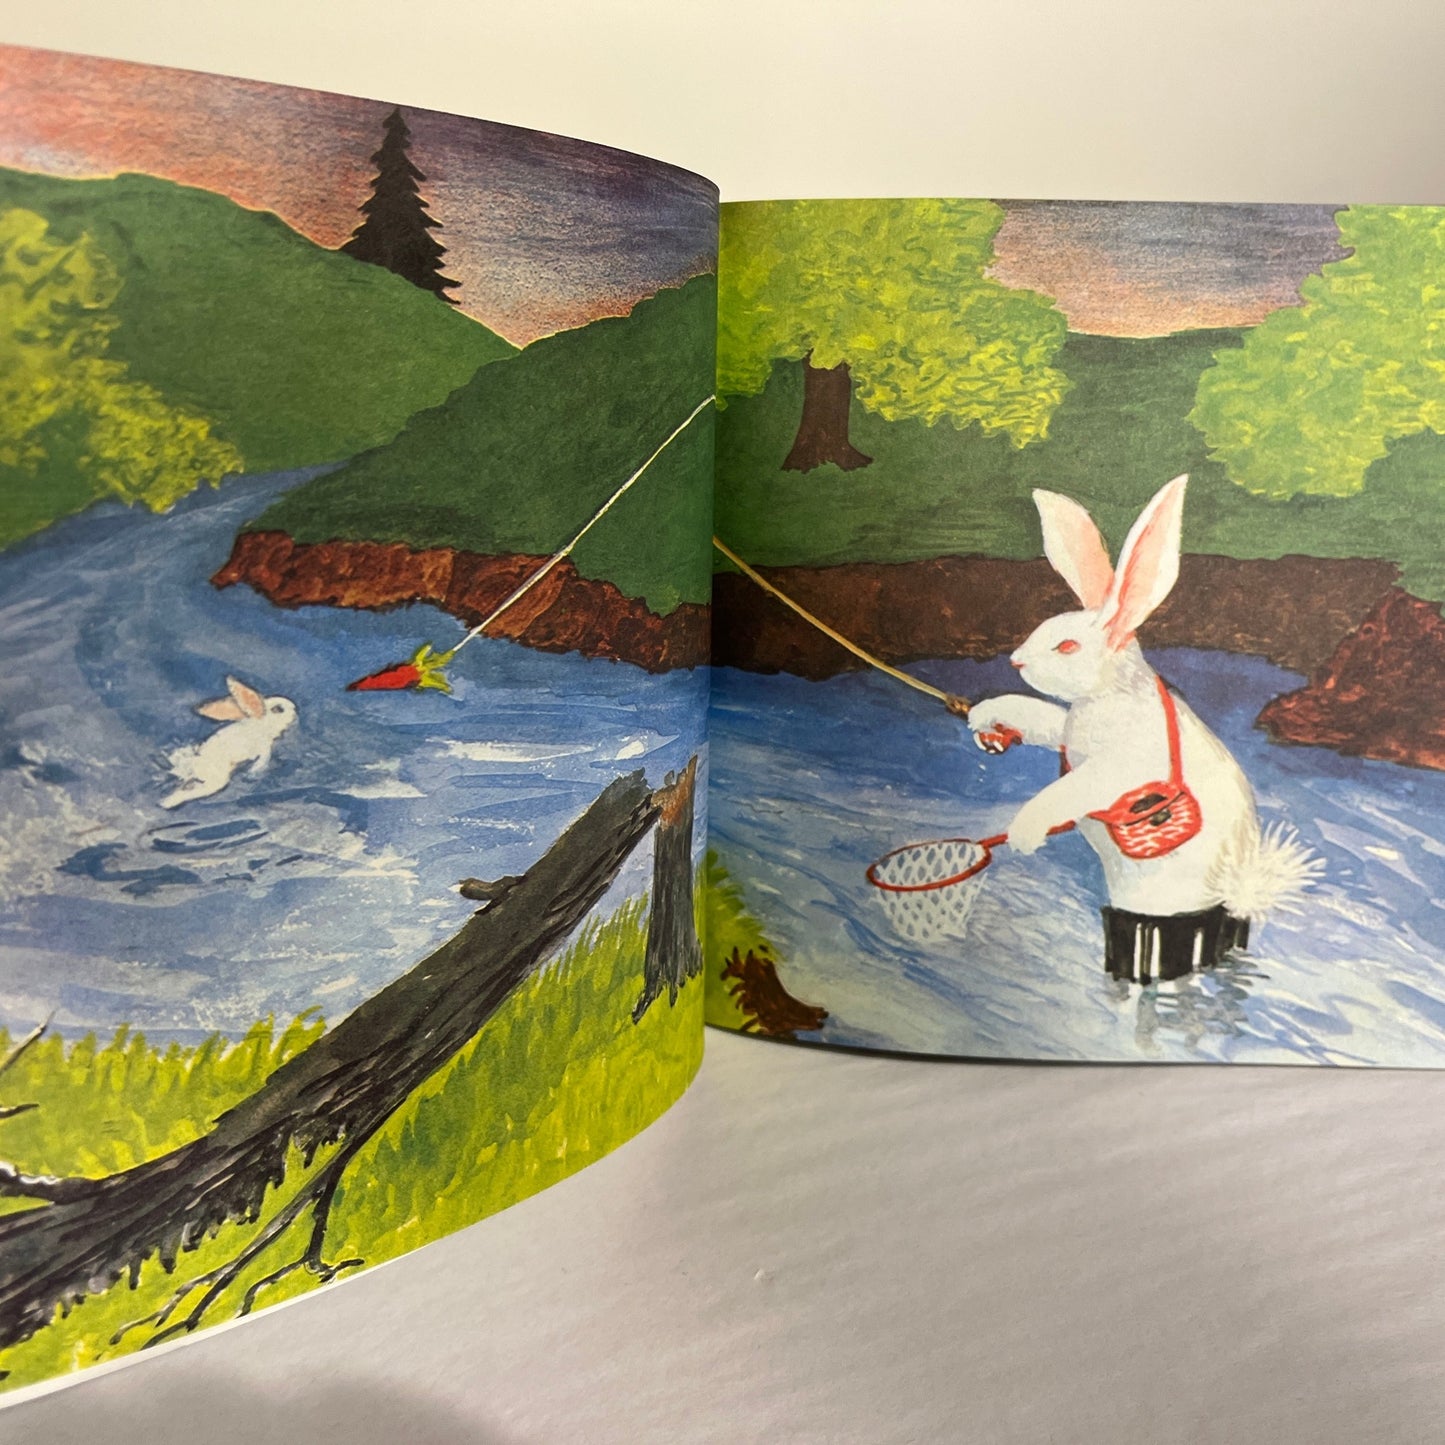 The Runaway Bunny softcover book by Margaret Wise Brown, pictures by Clement Hurd